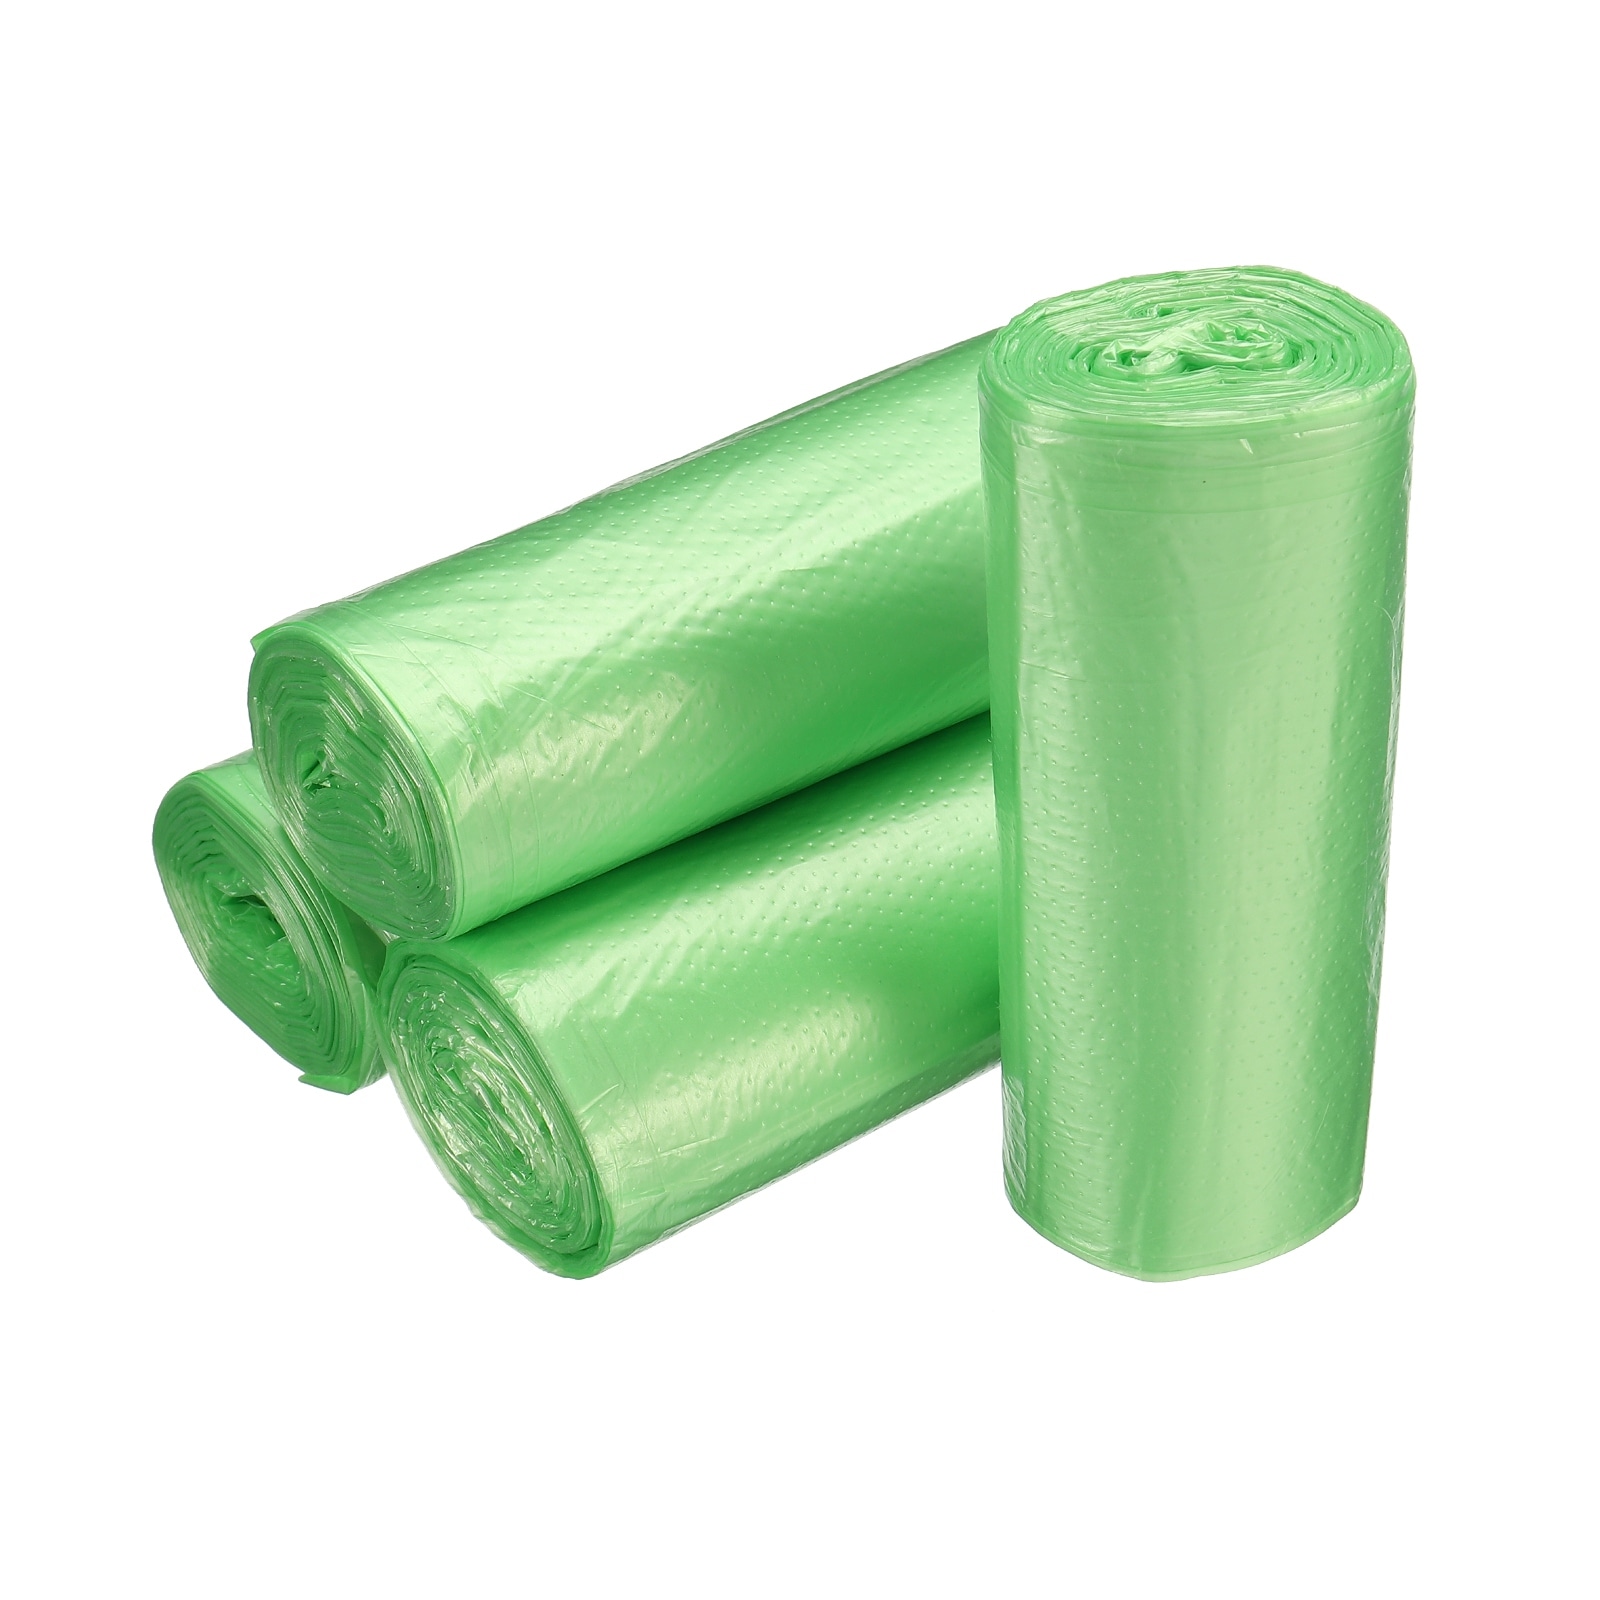 https://ak1.ostkcdn.com/images/products/is/images/direct/4e2e5bb917e842791e7d0162af22be979b17a5bf/8-Rolls---240-Counts-Small-Trash-Bags-0.5-Gallon-Garbage-Bags.jpg